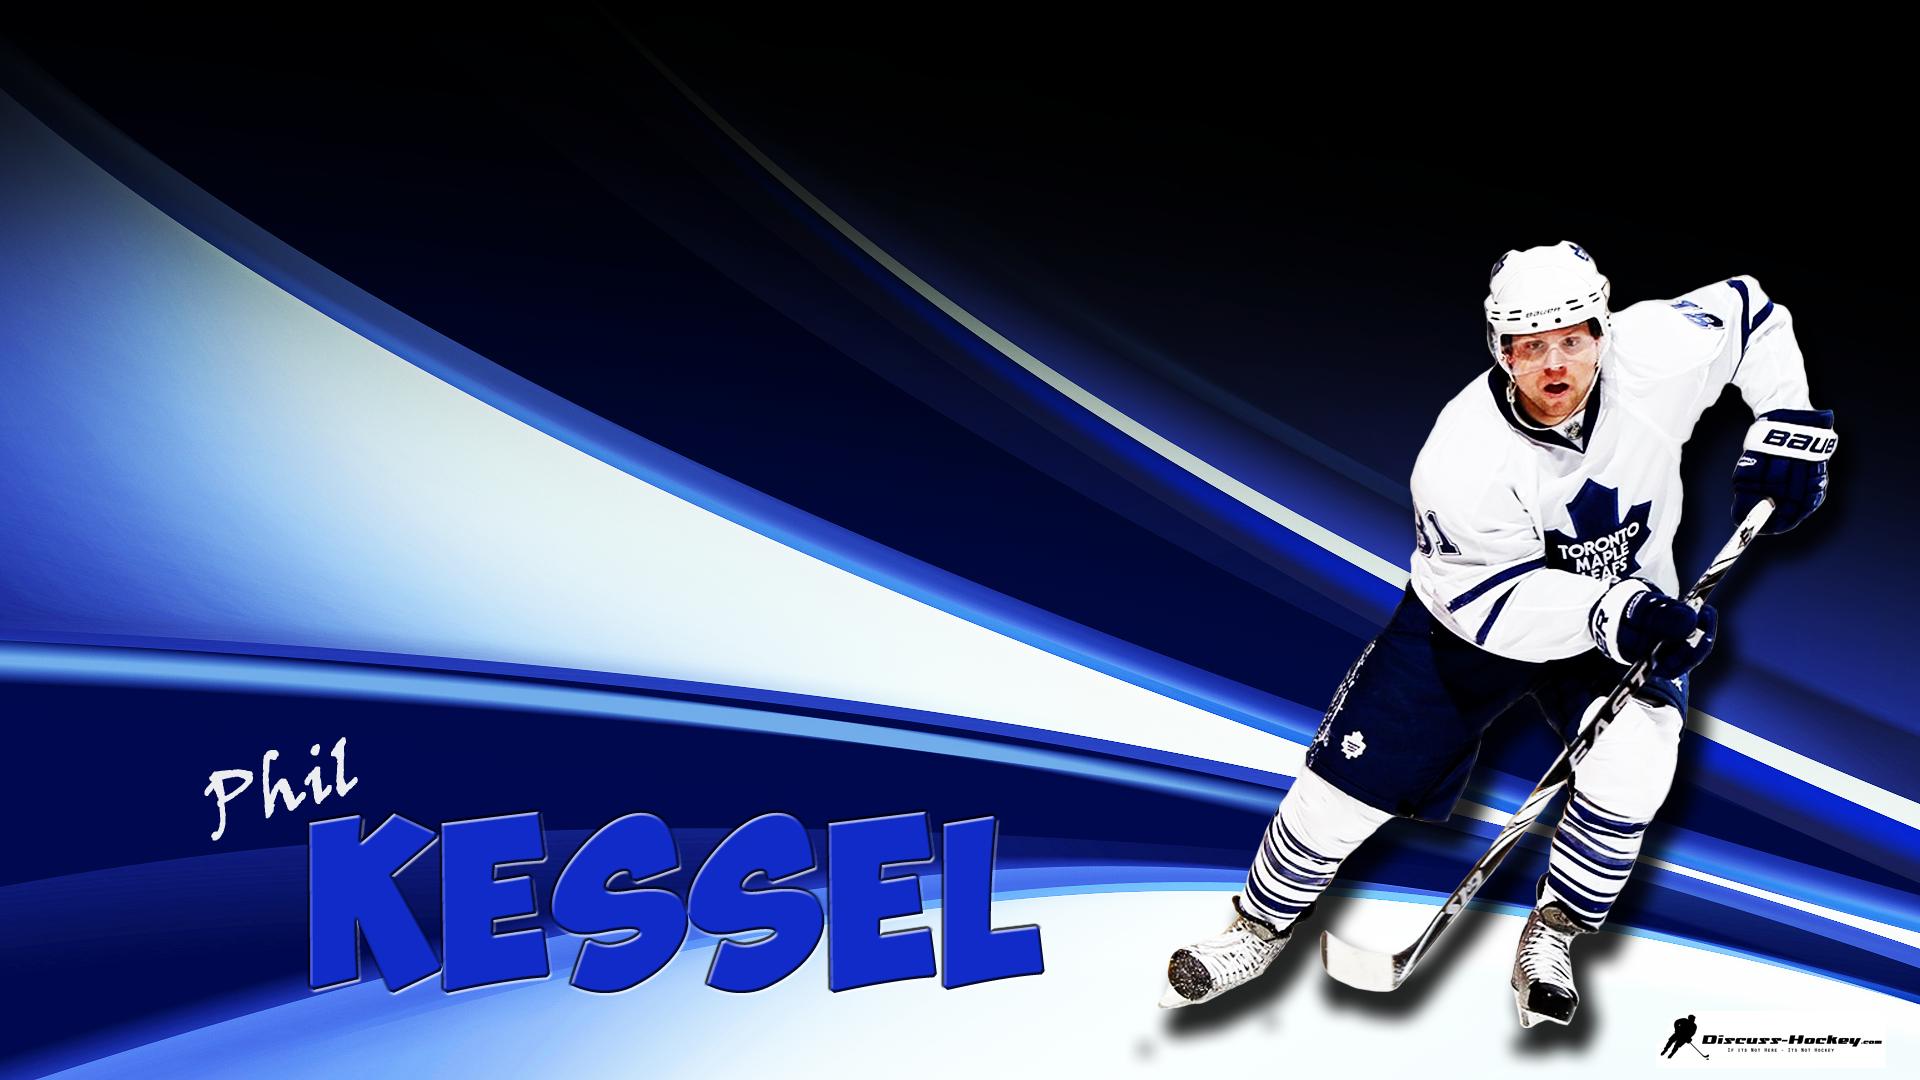 Amazing Hockey player Phil Kessel wallpapers and images